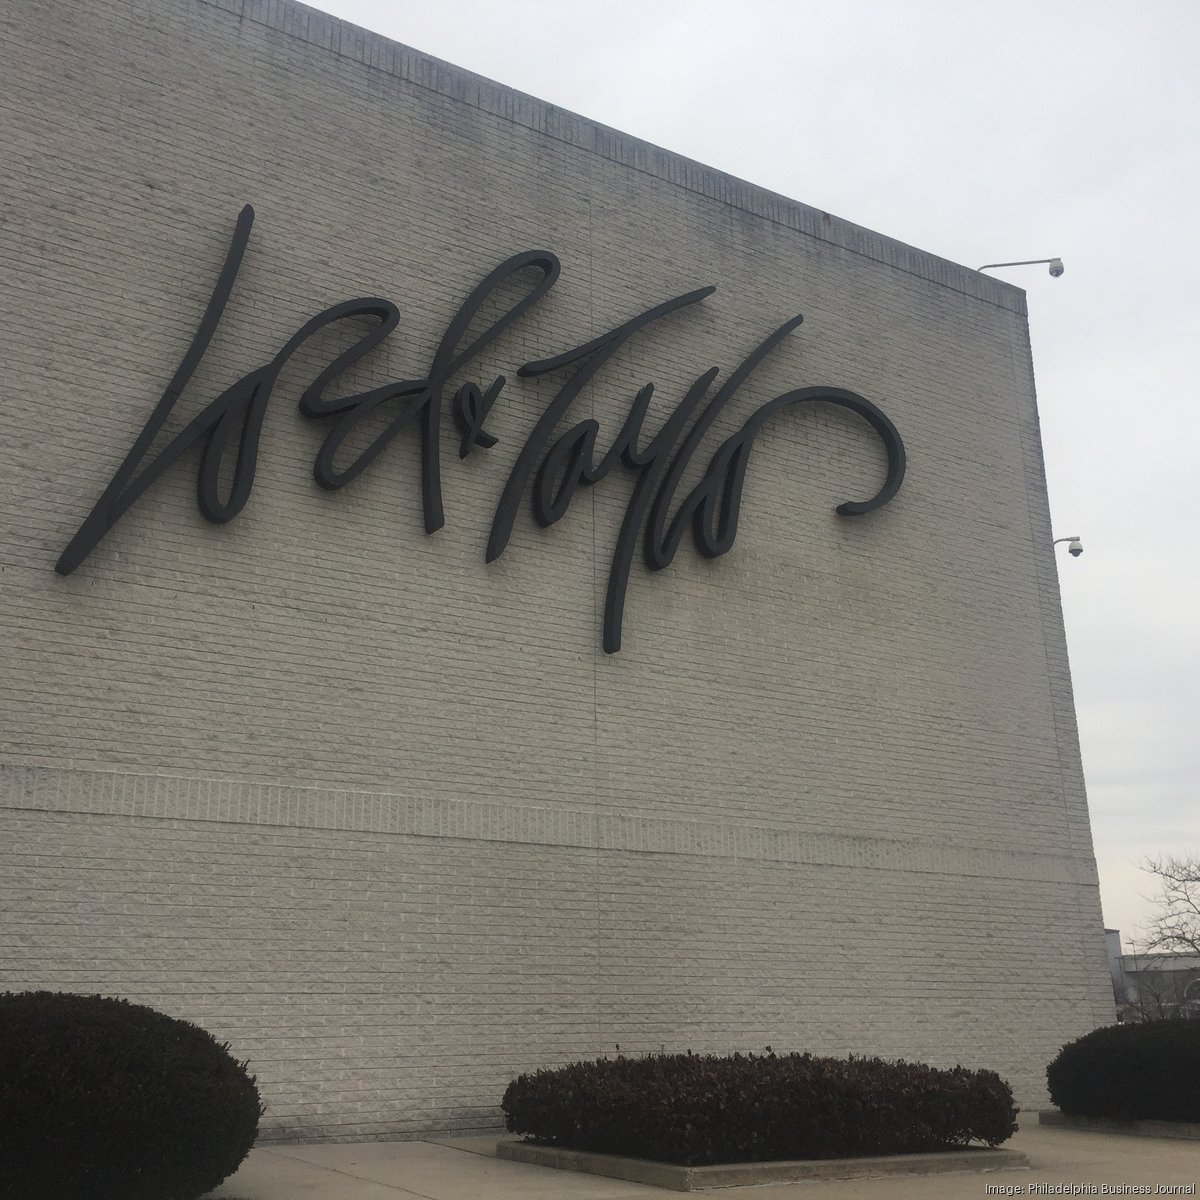 Lord & Taylor department store chain has been sold